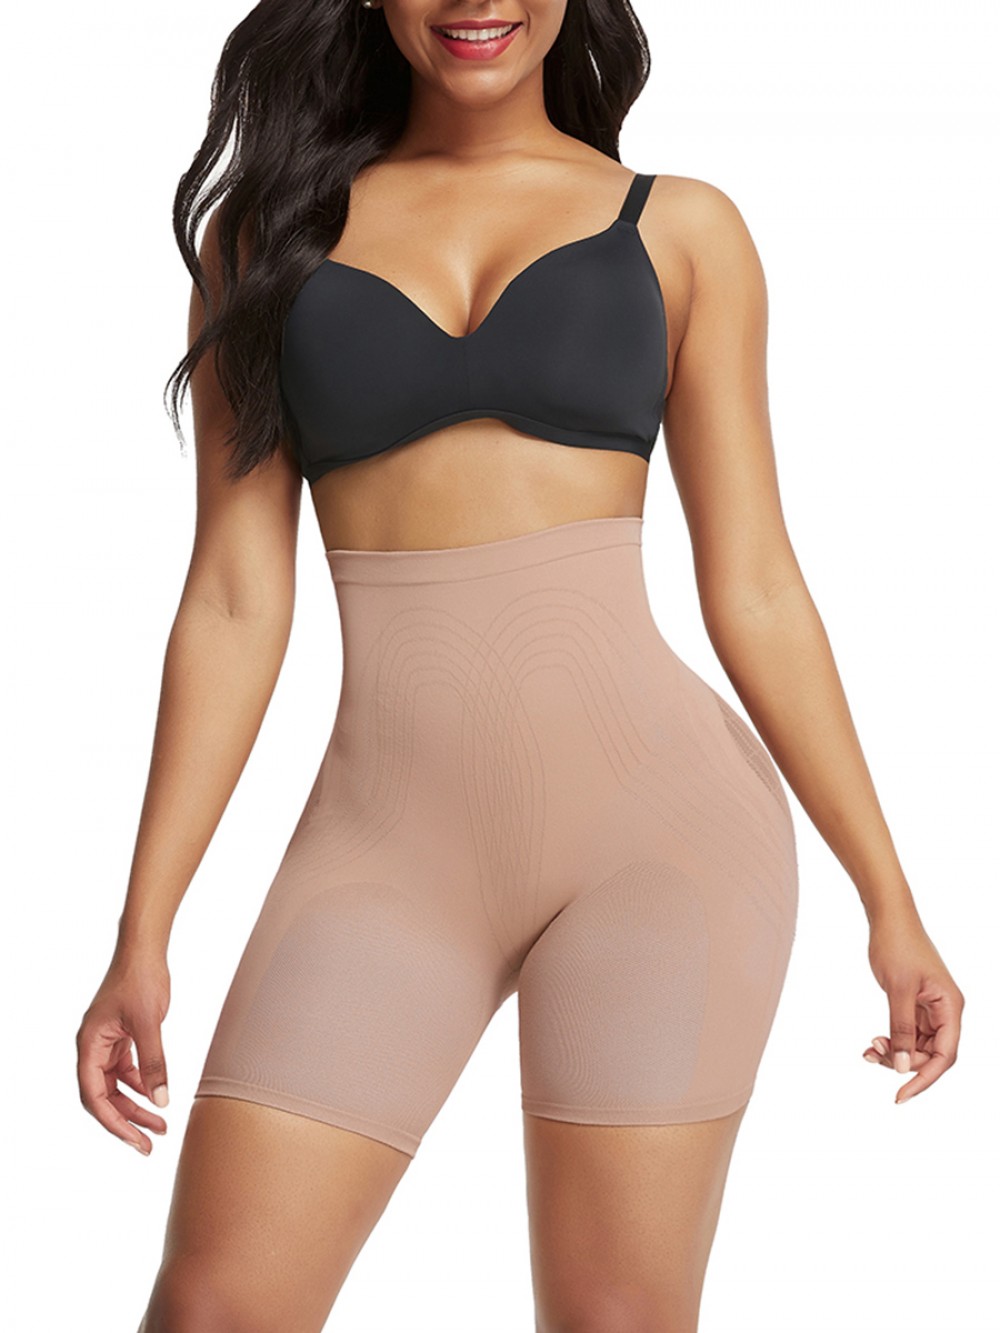 Skin Color Thigh Length Body Shaper Buttock Lifter High Rise Breathable